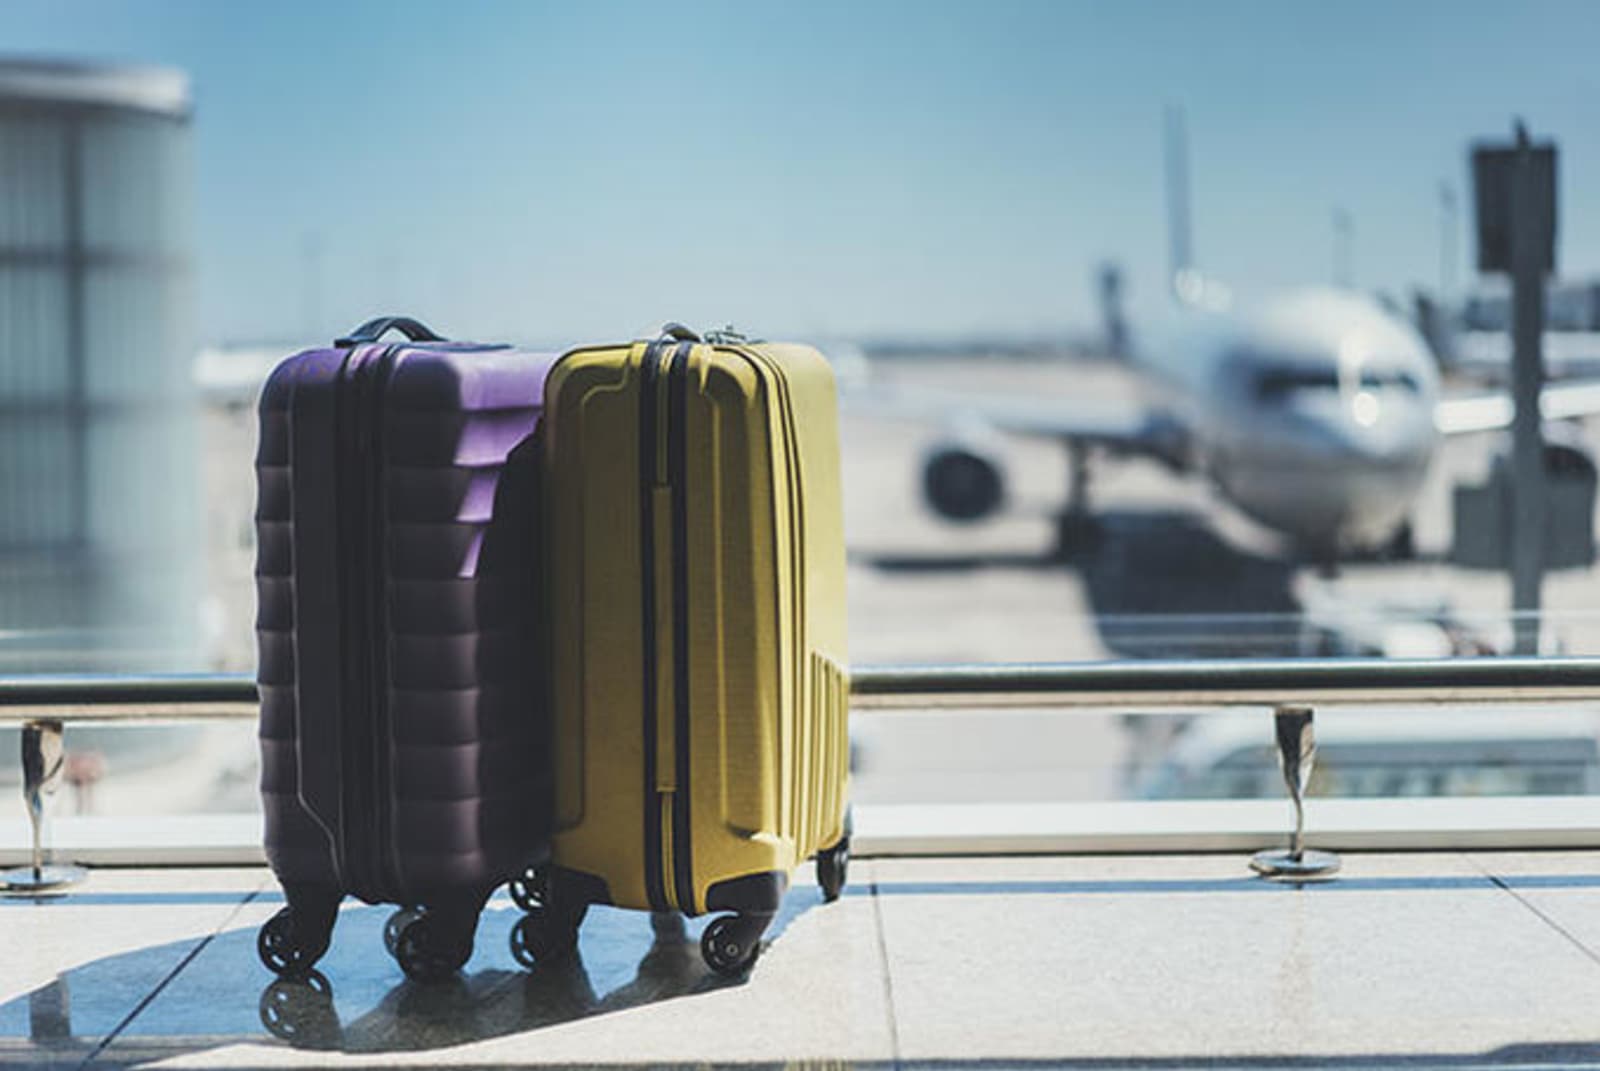 Two rolling luggage cases - one purple, one yellow - in an airport, in front of a large window looking out at an airplane